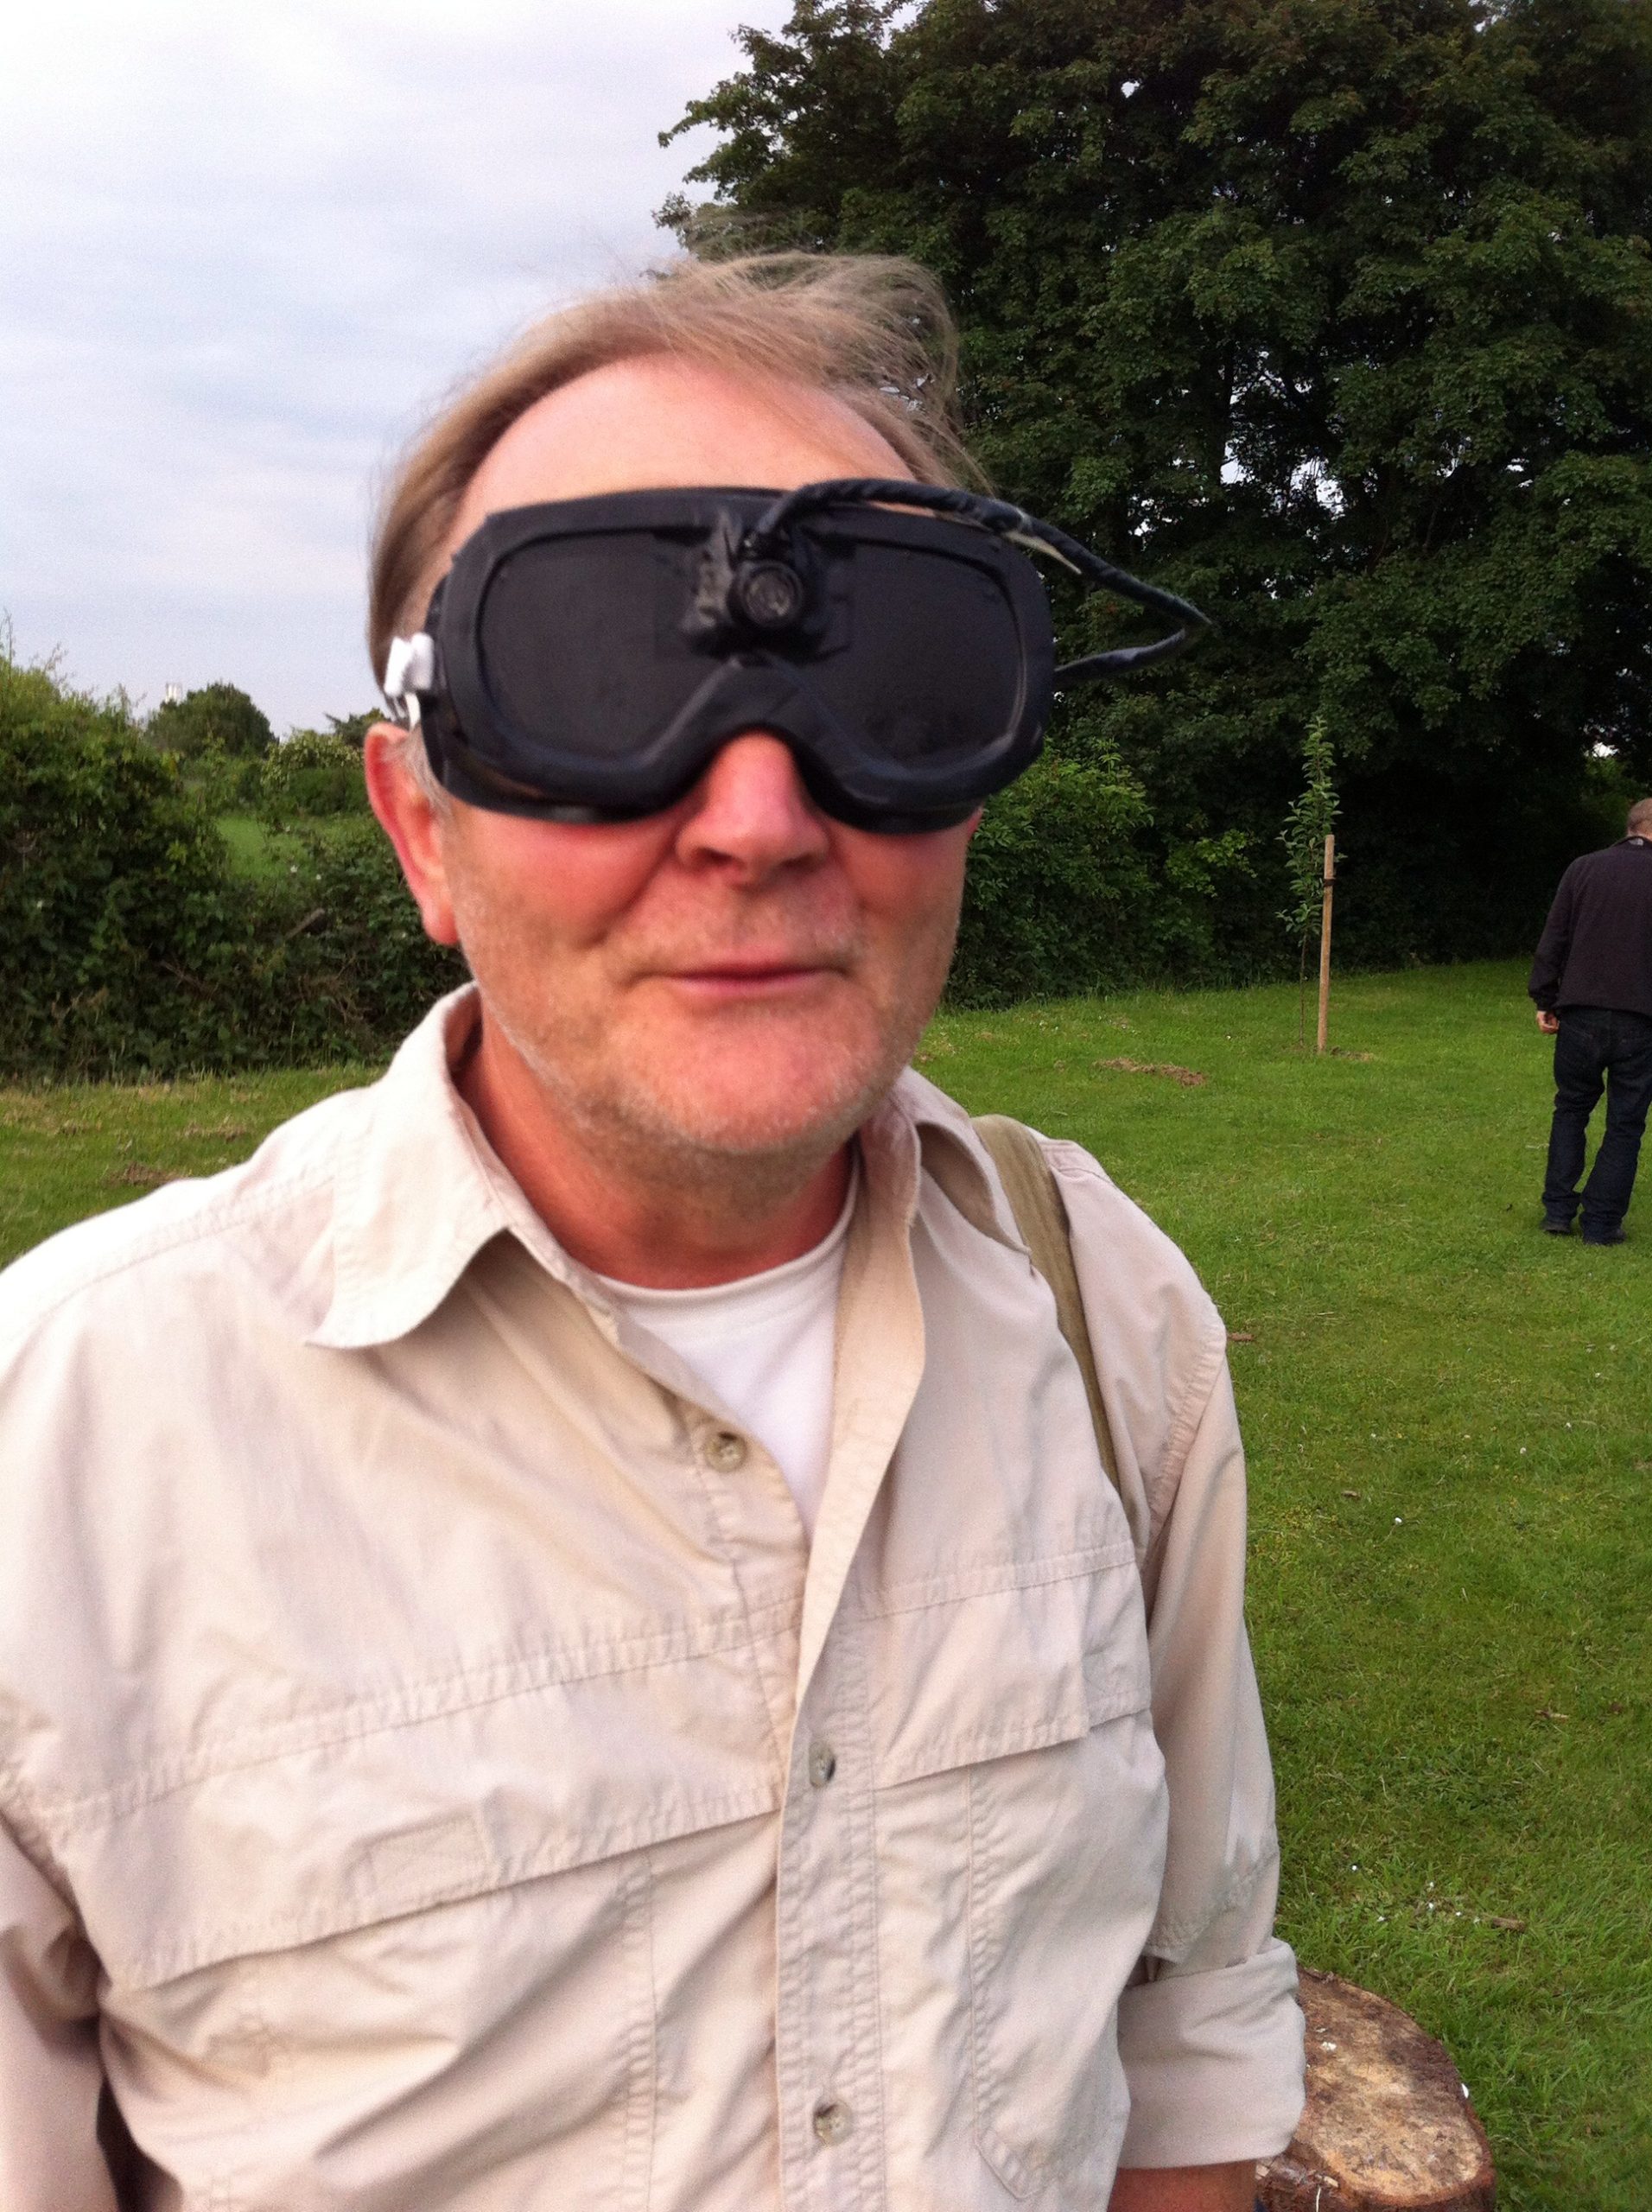 A man wearing blacked-out goggles